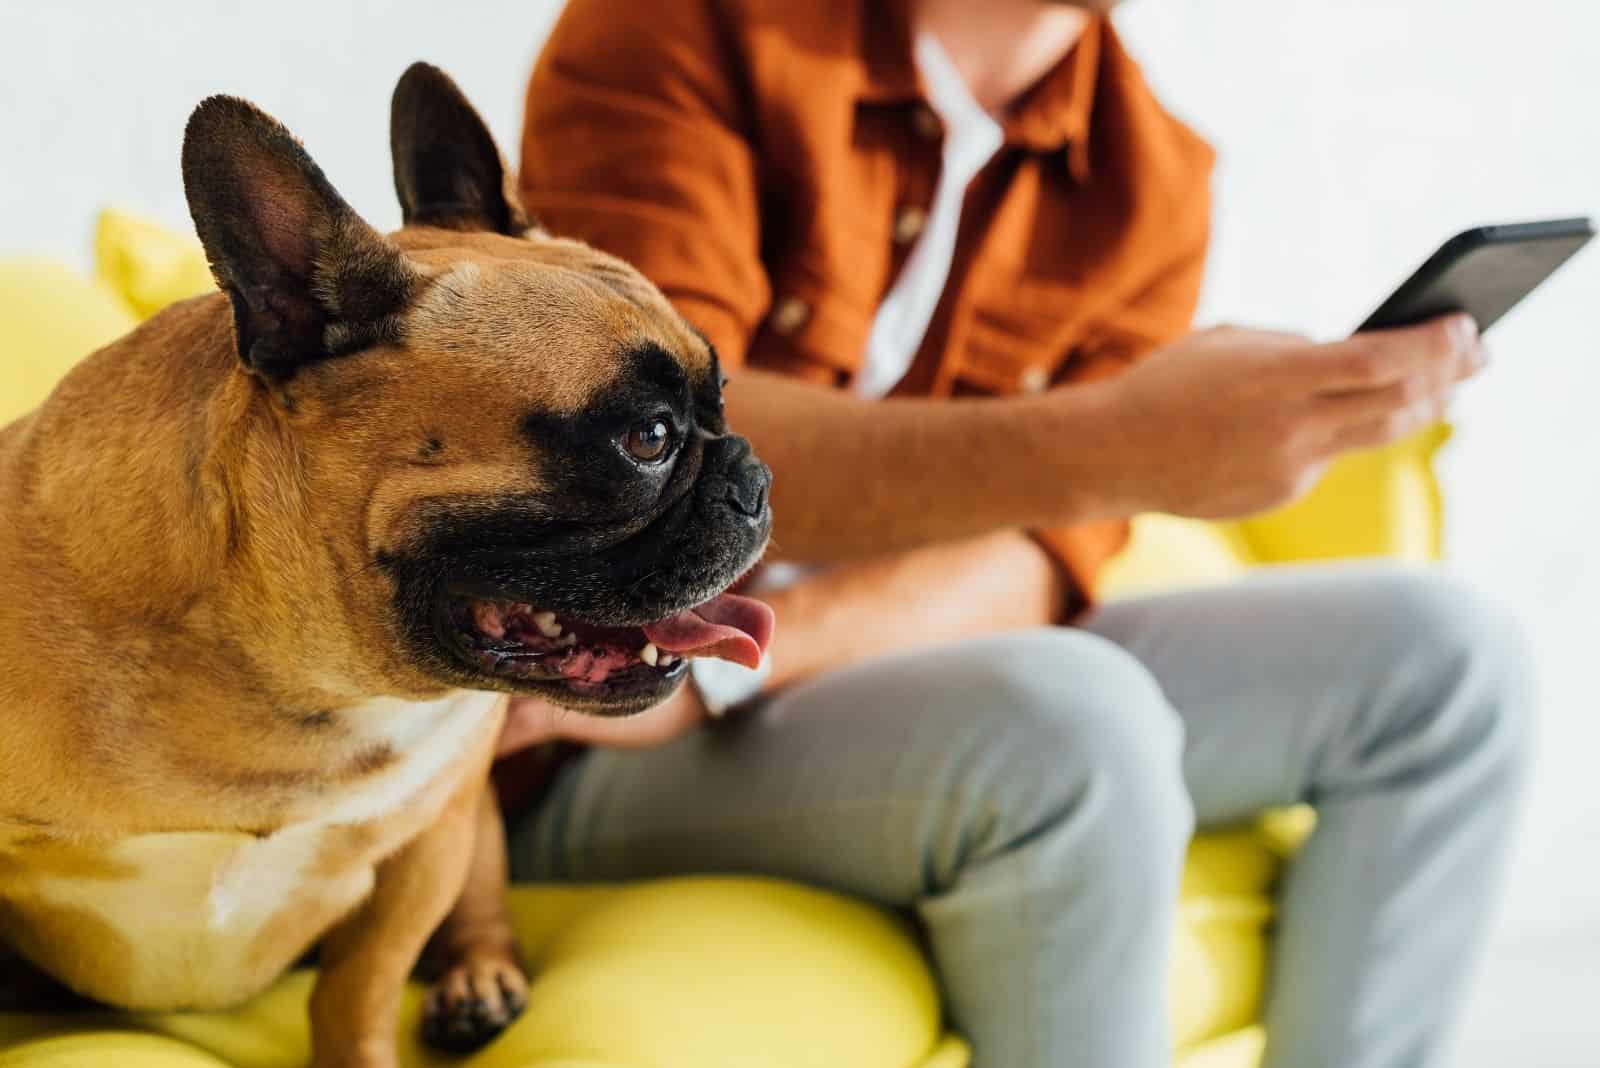 french bulldog sitting beside a man holding a phone petting him in the yellow sofa